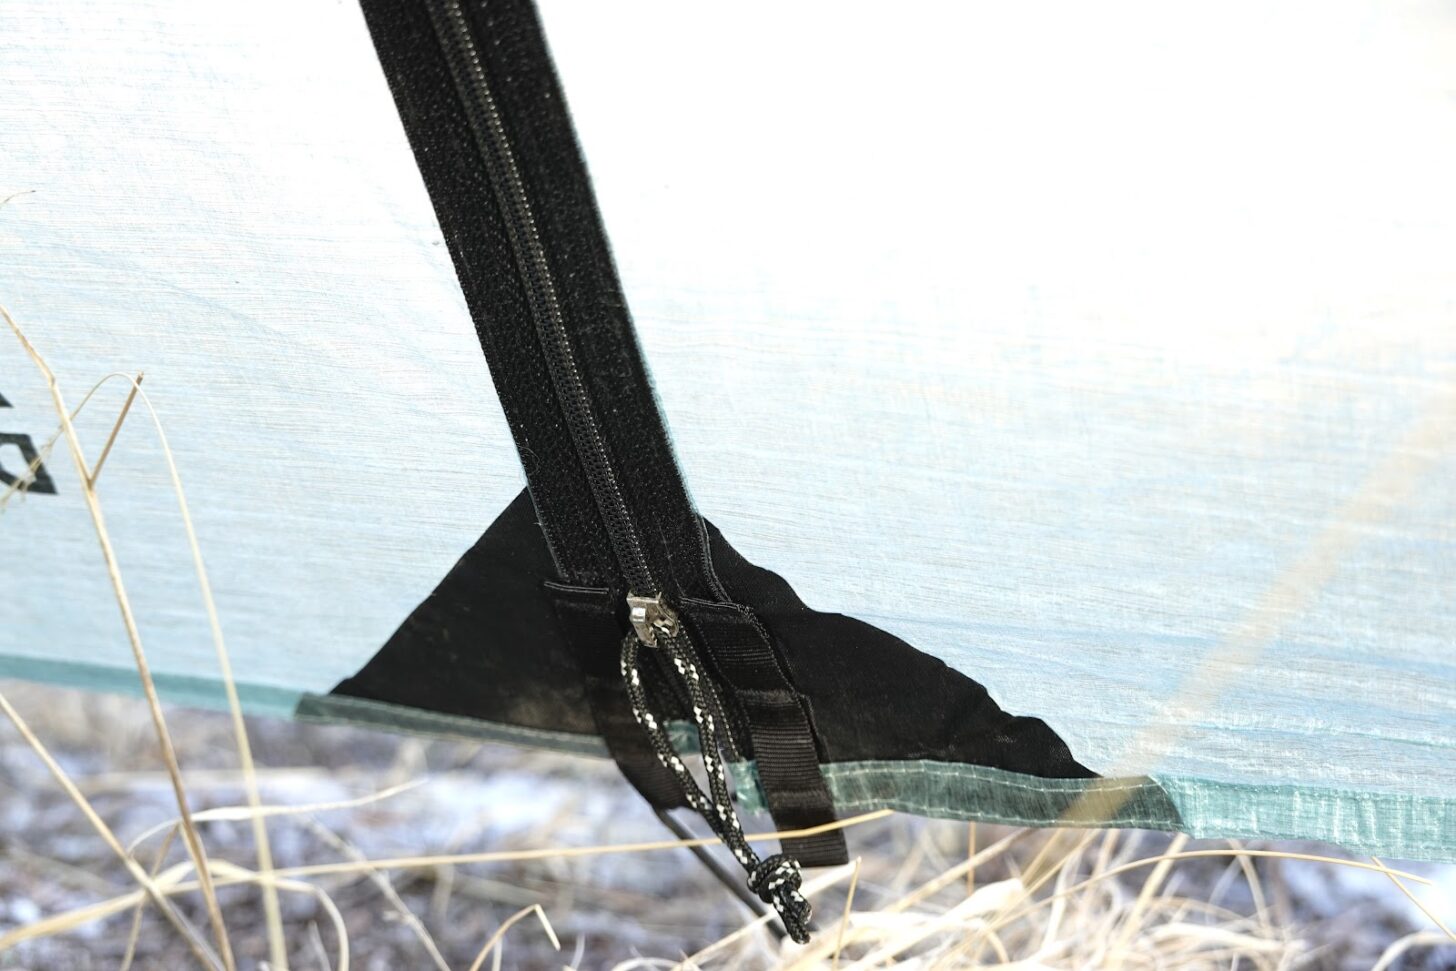 a close-up of the zipper on the outer fly of the Durston x-mid pro 2